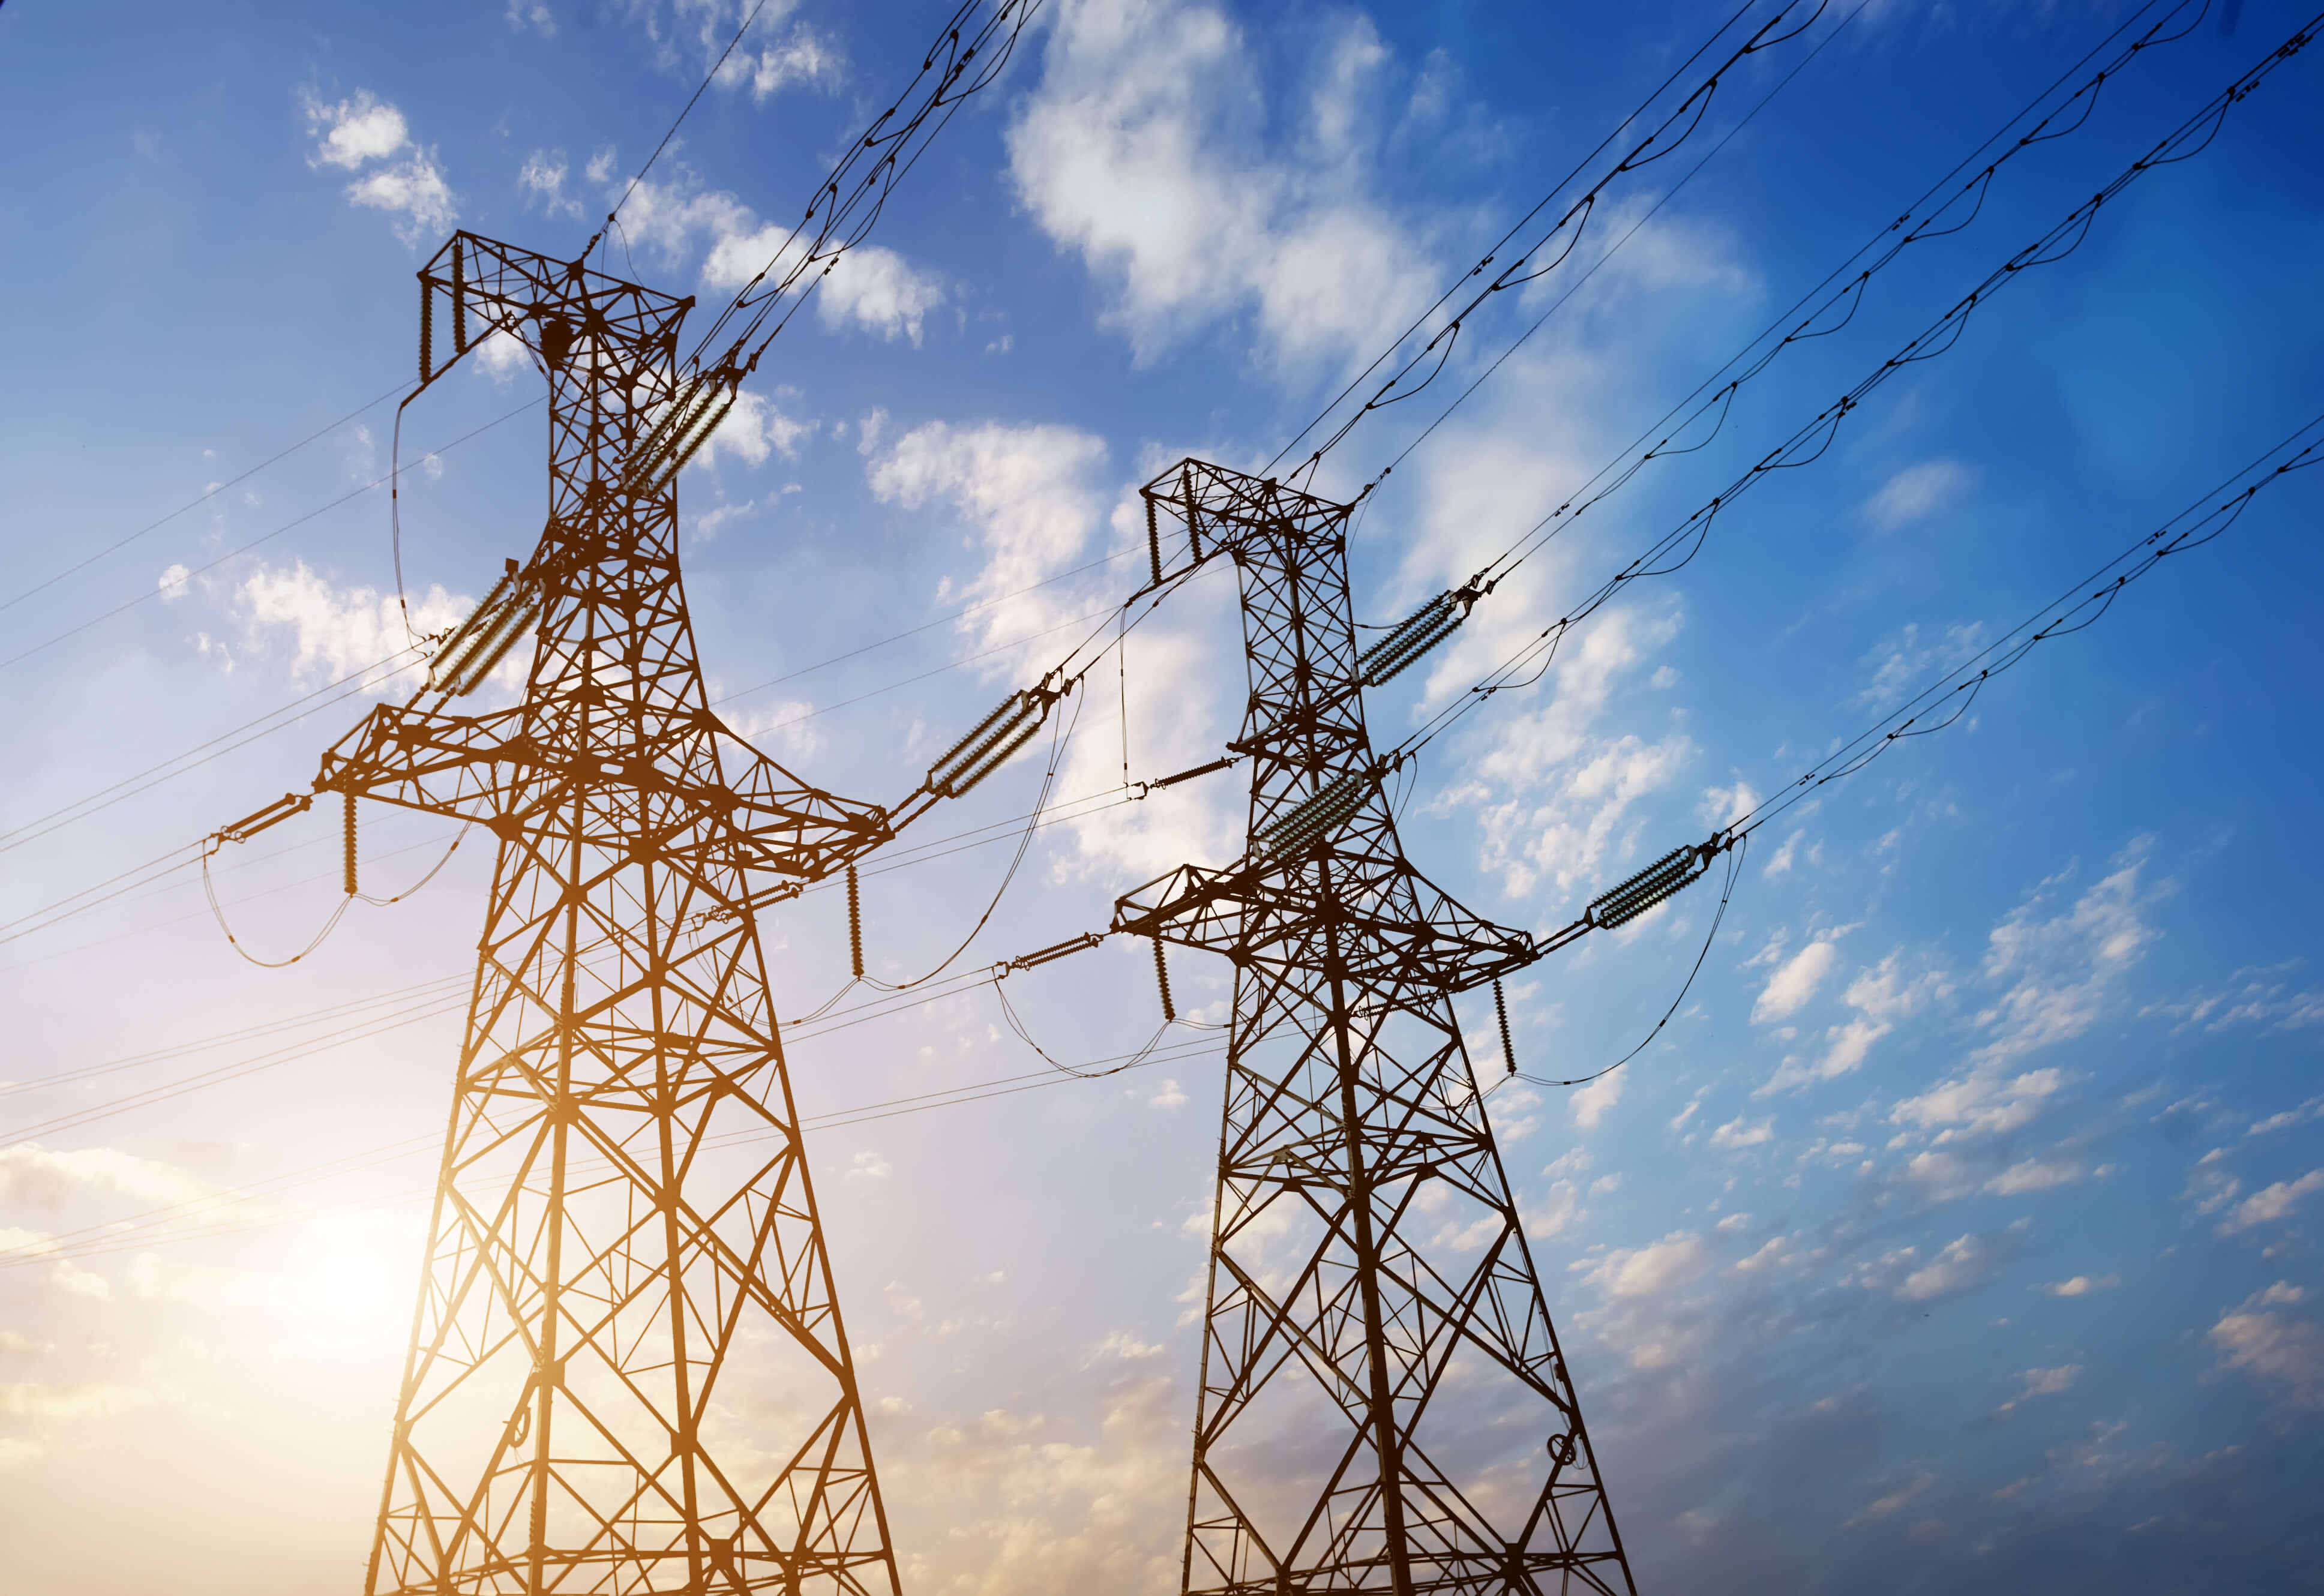 The Future May be Bright for our Faltering Power Grid